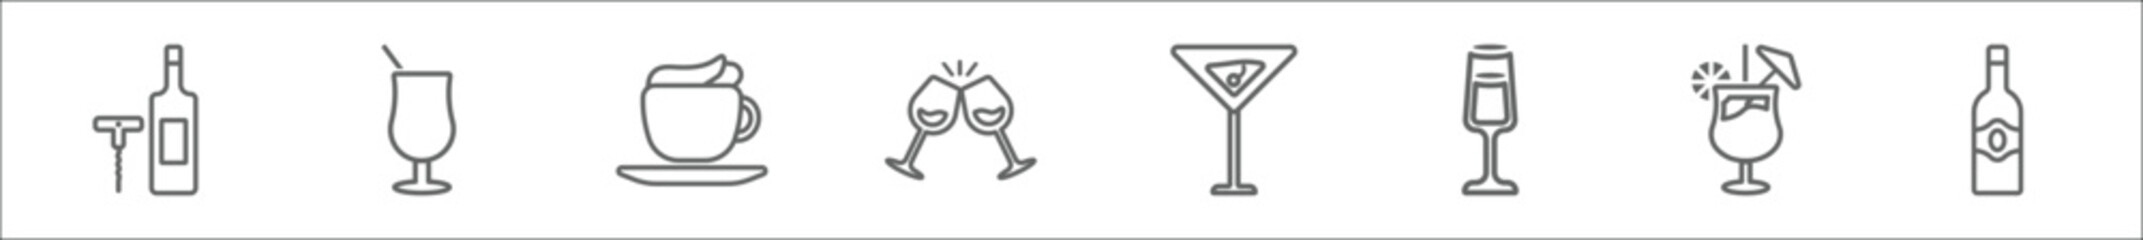 outline set of drinks line icons. linear vector icons such as corkscrews and bottle of wine, tequila sunrise, cappuccino, brindis with wine glasses, manhattan drink, pisco sour, mai tai, alcohol